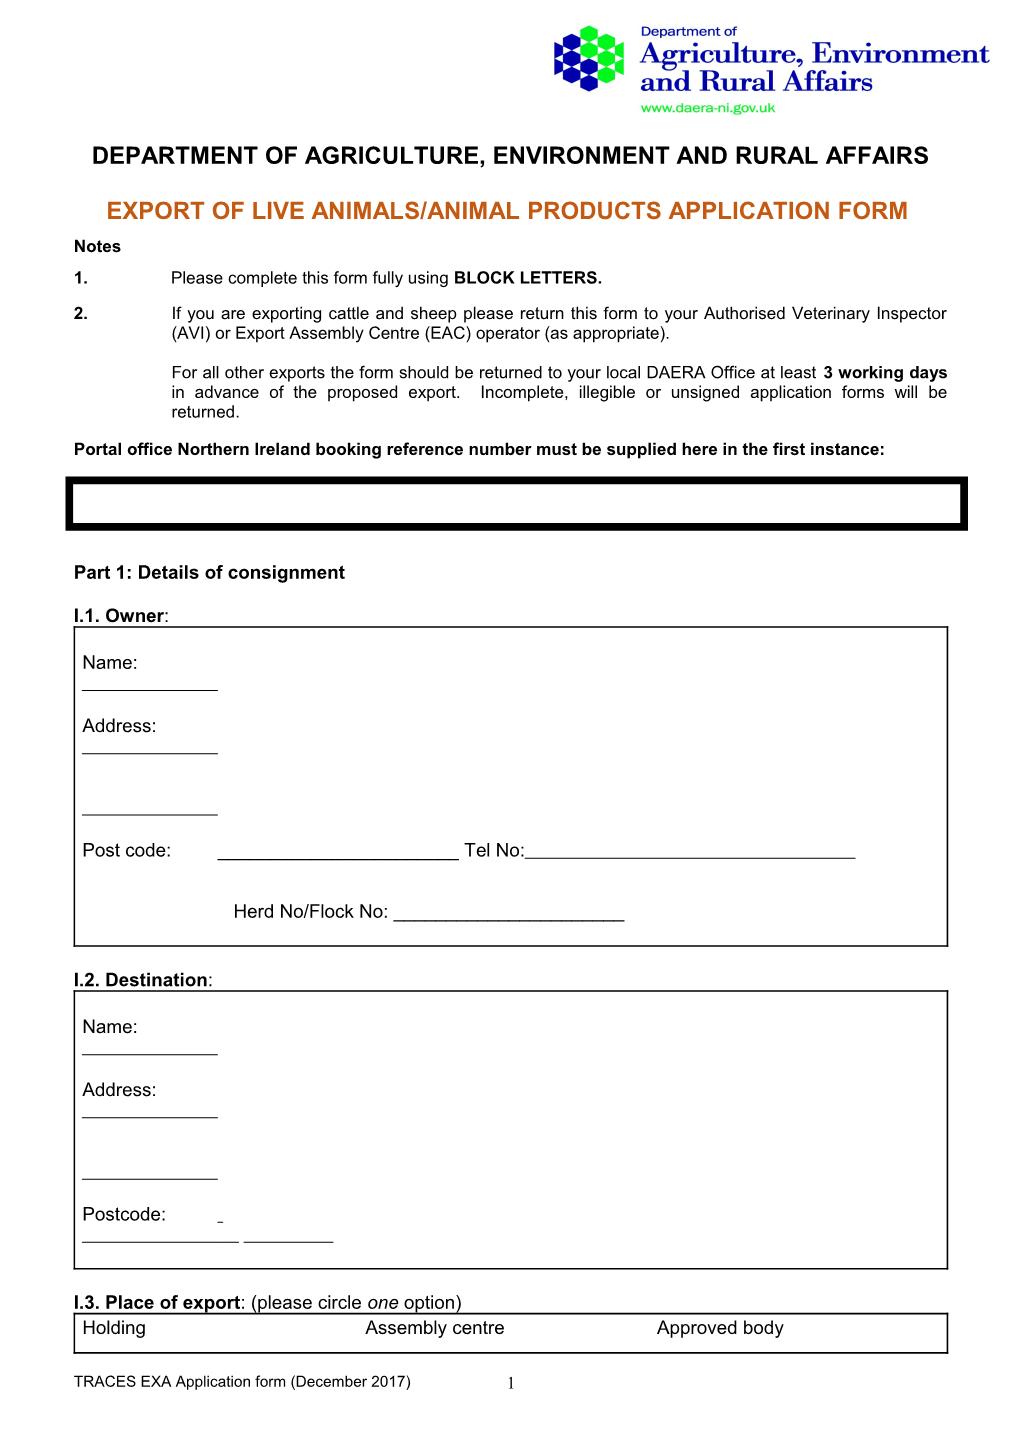 Title of Application Form